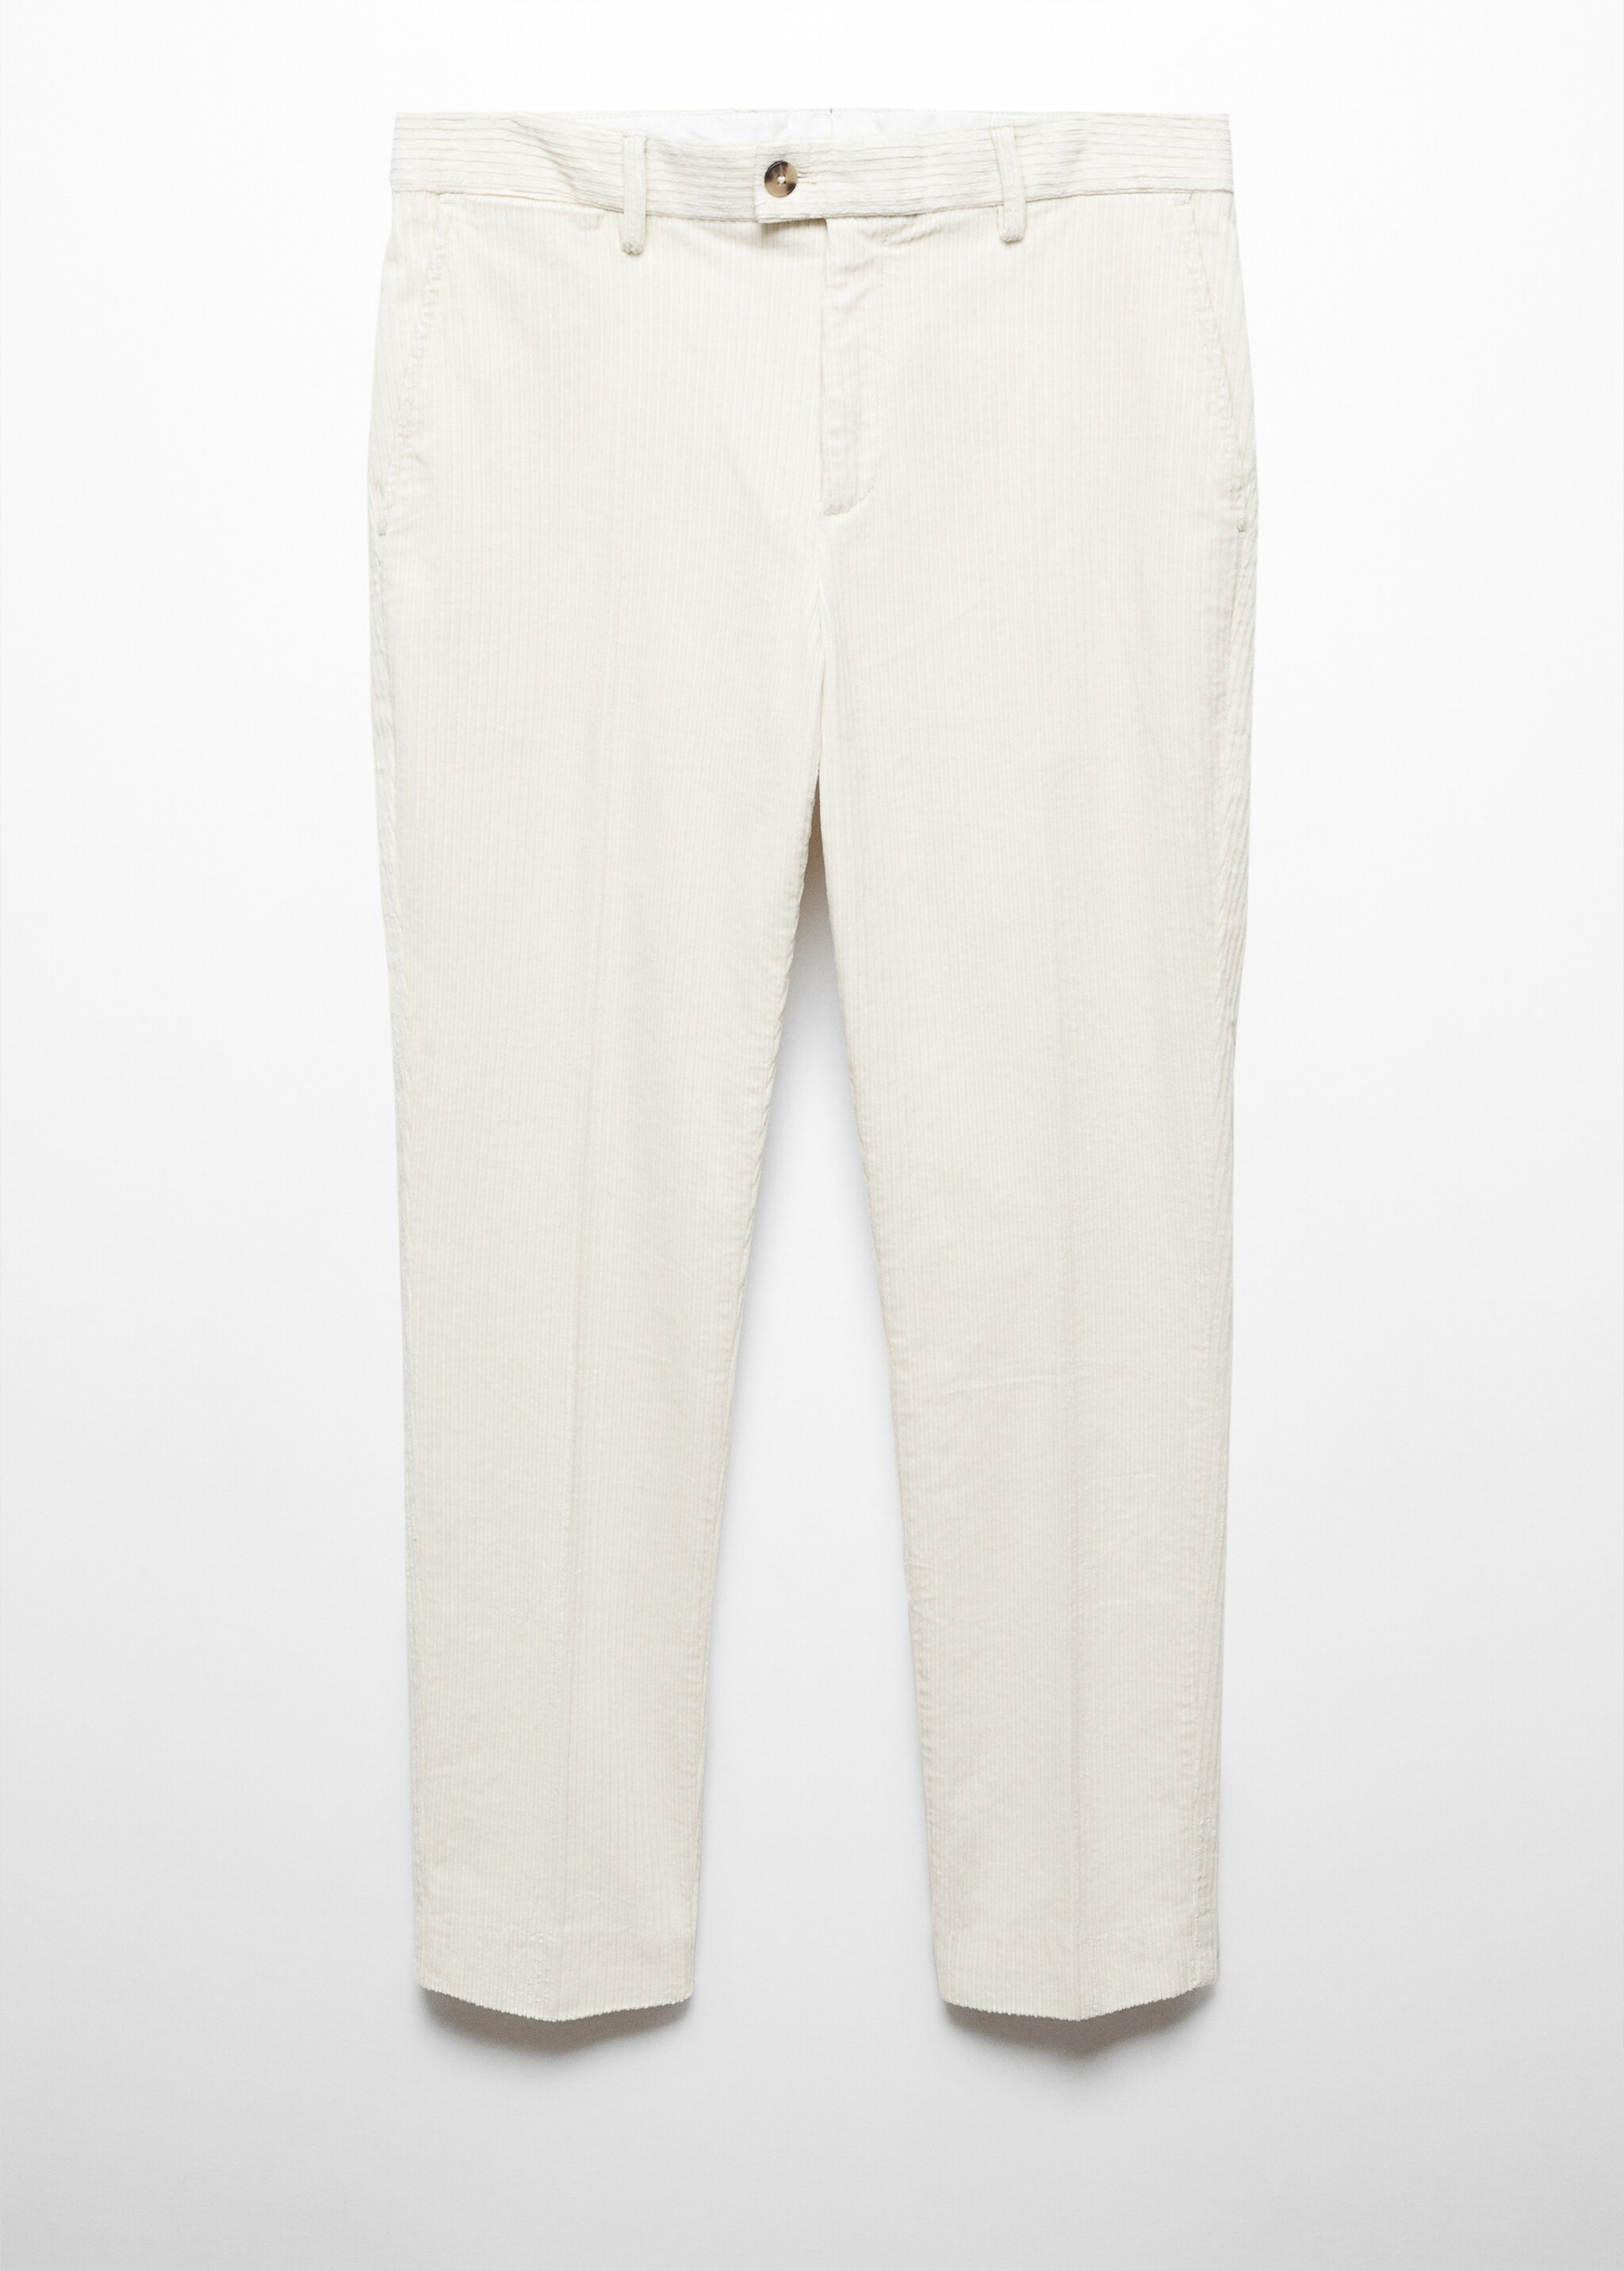 Slim fit corduroy pants - Article without model